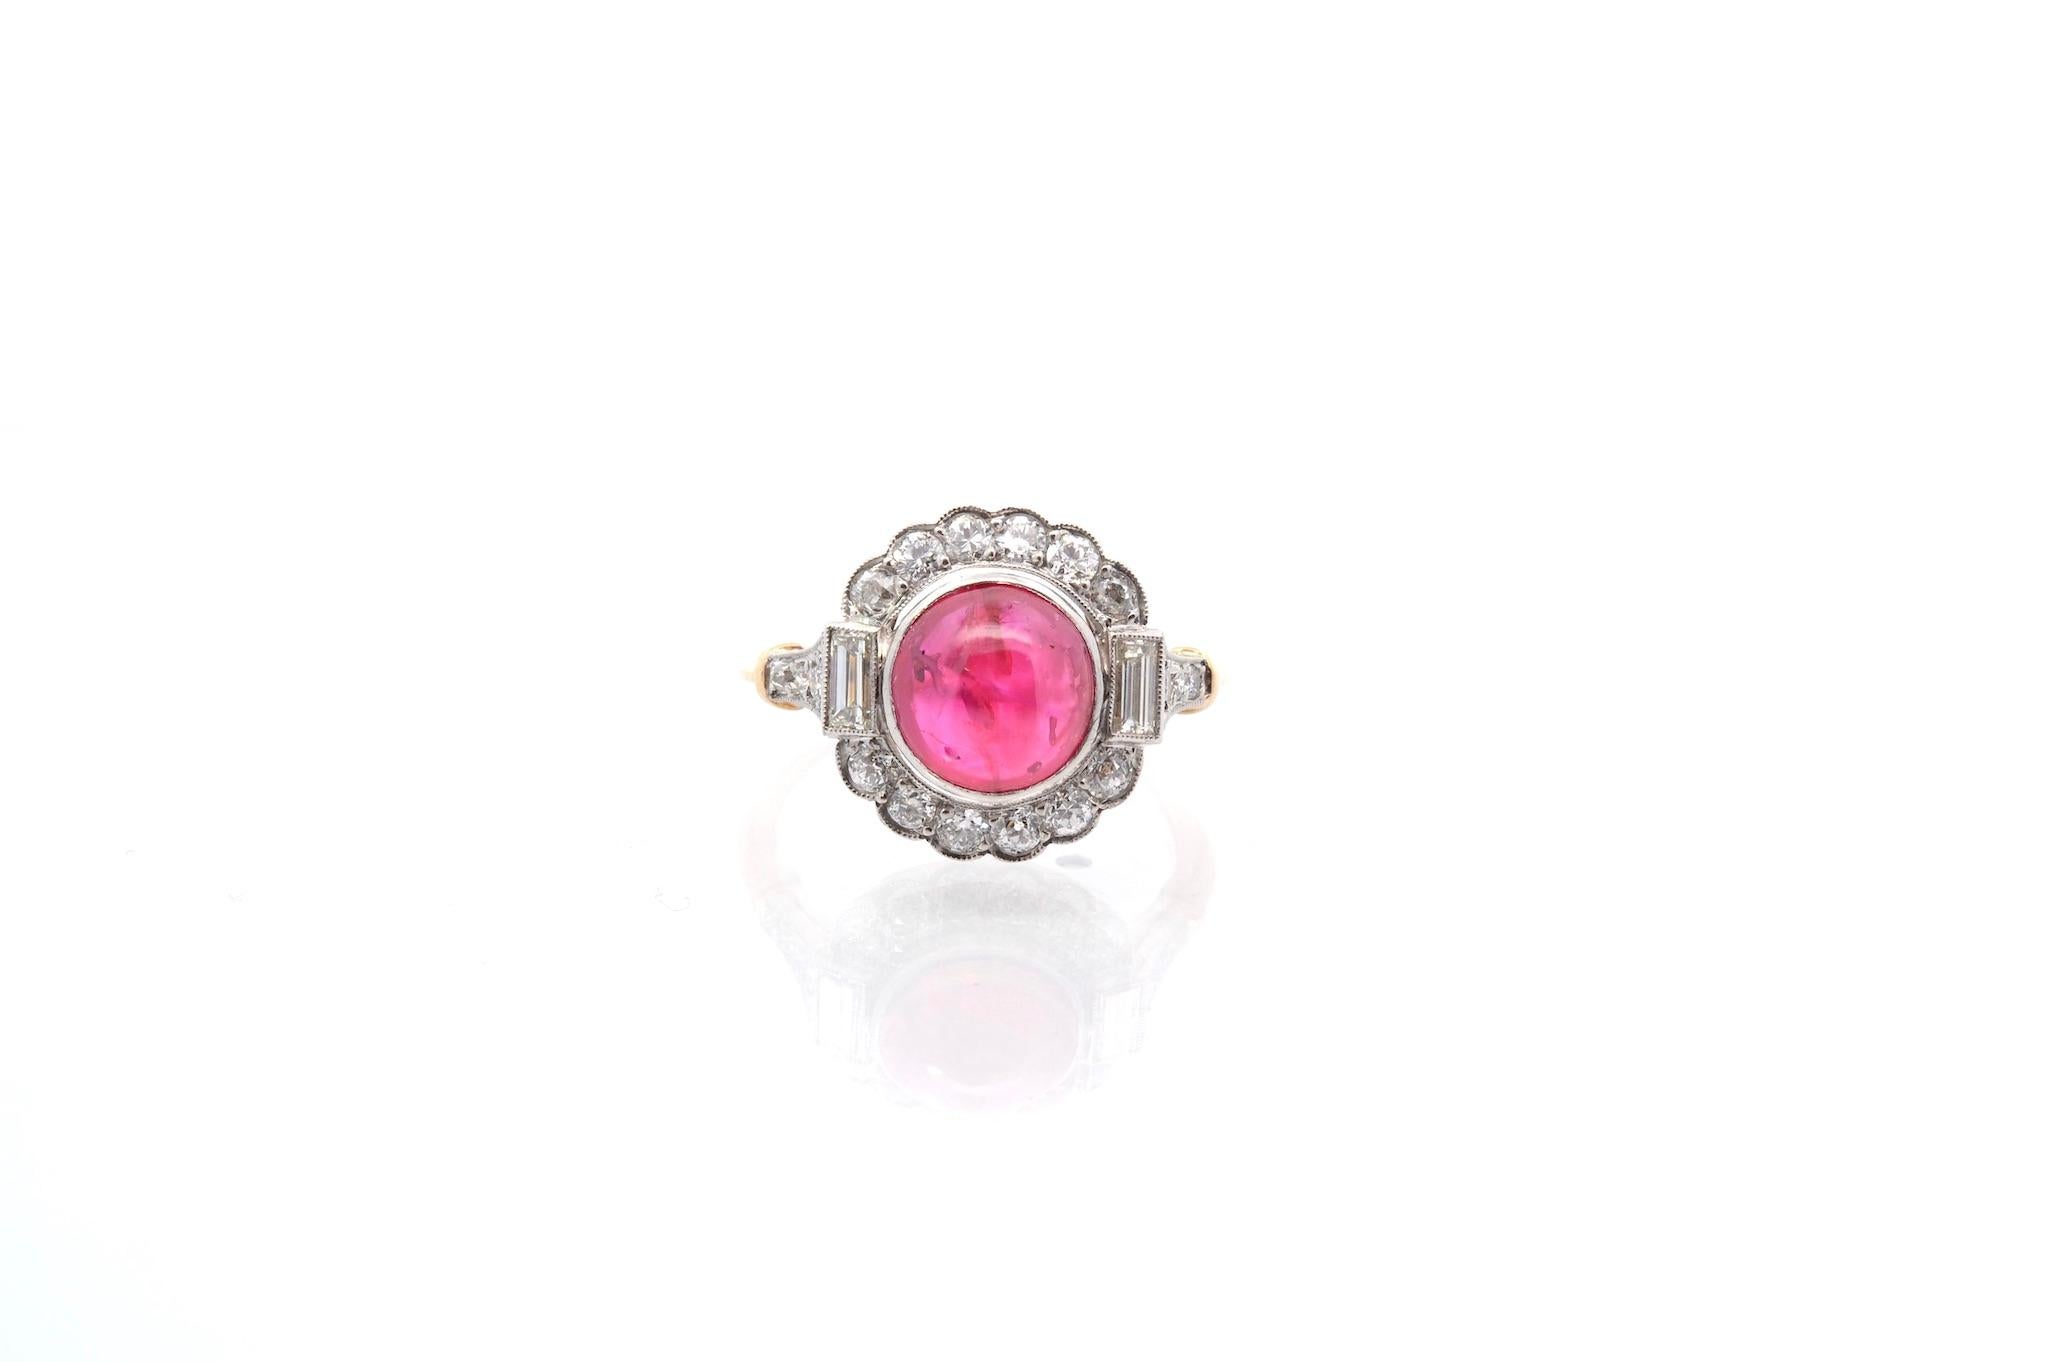 Stones: Unheated Burmese Ruby: 3.38 cts, 18 round diamonds: 0.85 ct, 2 baguette diamonds: 0.15 ct.
Material: Gold and platinum
Dimensions: 1.5 x 1.4 cm
Weight: 4.7g
Period: Recent 1900 style (handmade)
Size: 54 (free sizing)
Certificate
Ref. : 25317